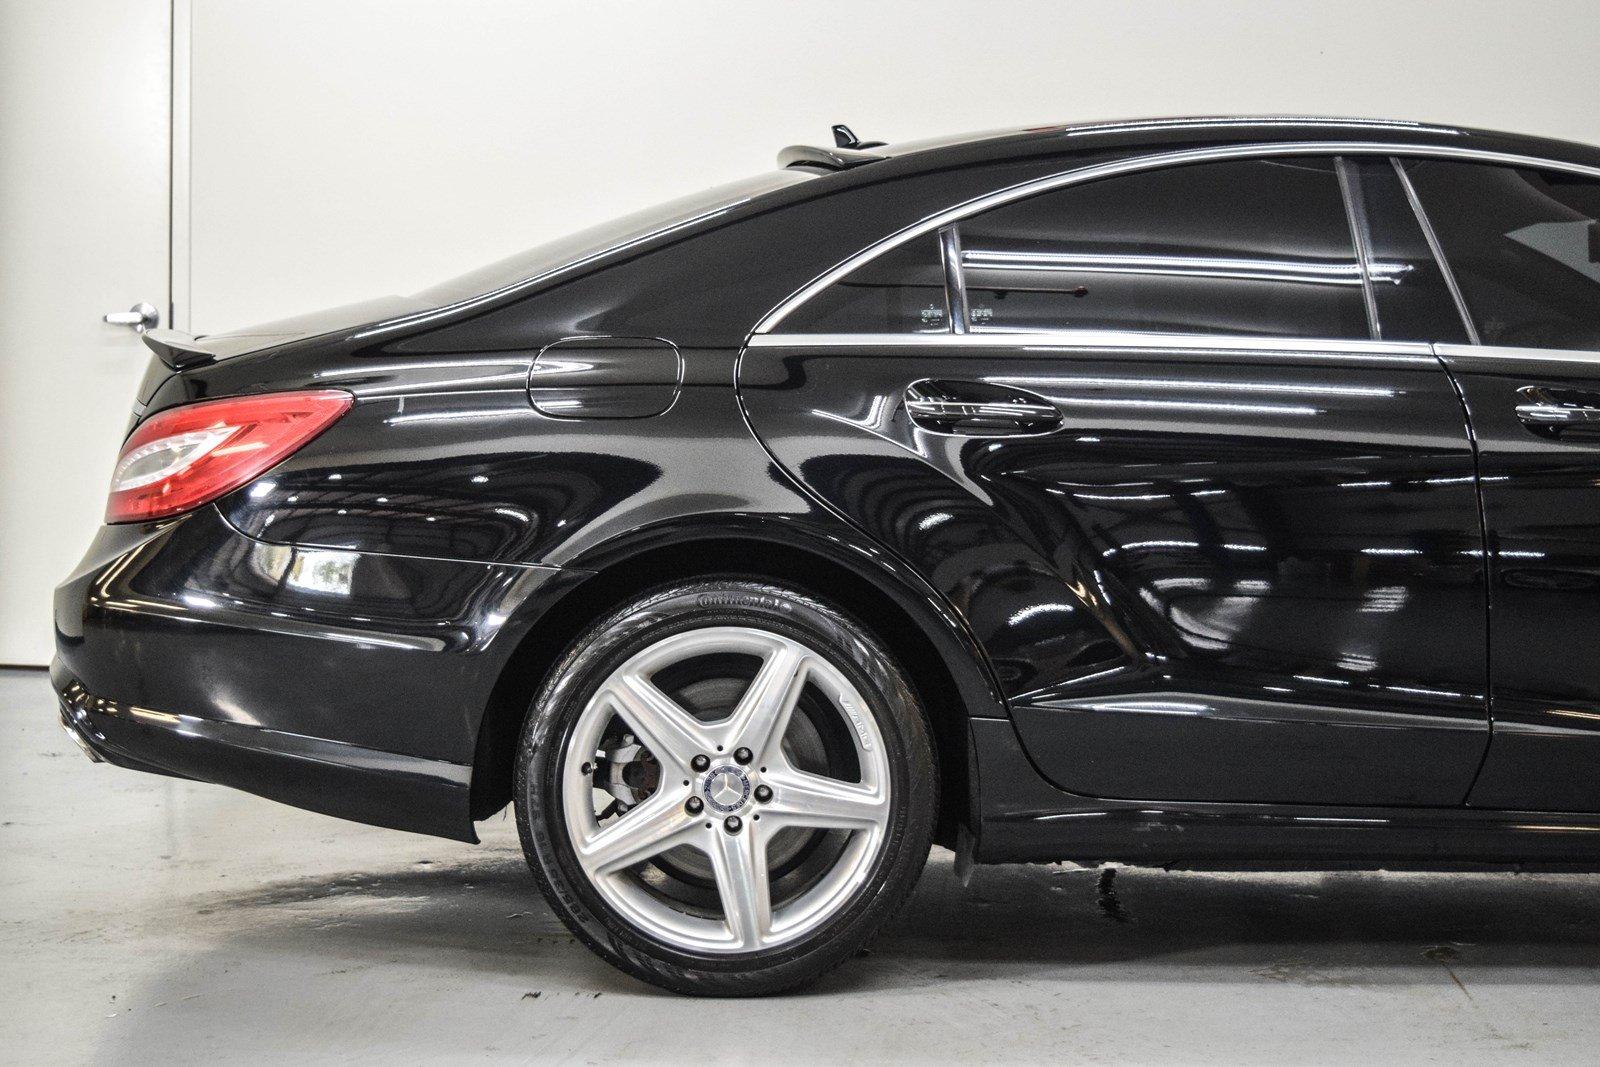 Used 2013 Mercedes-Benz CLS-Class CLS550 for sale Sold at Gravity Autos Marietta in Marietta GA 30060 30